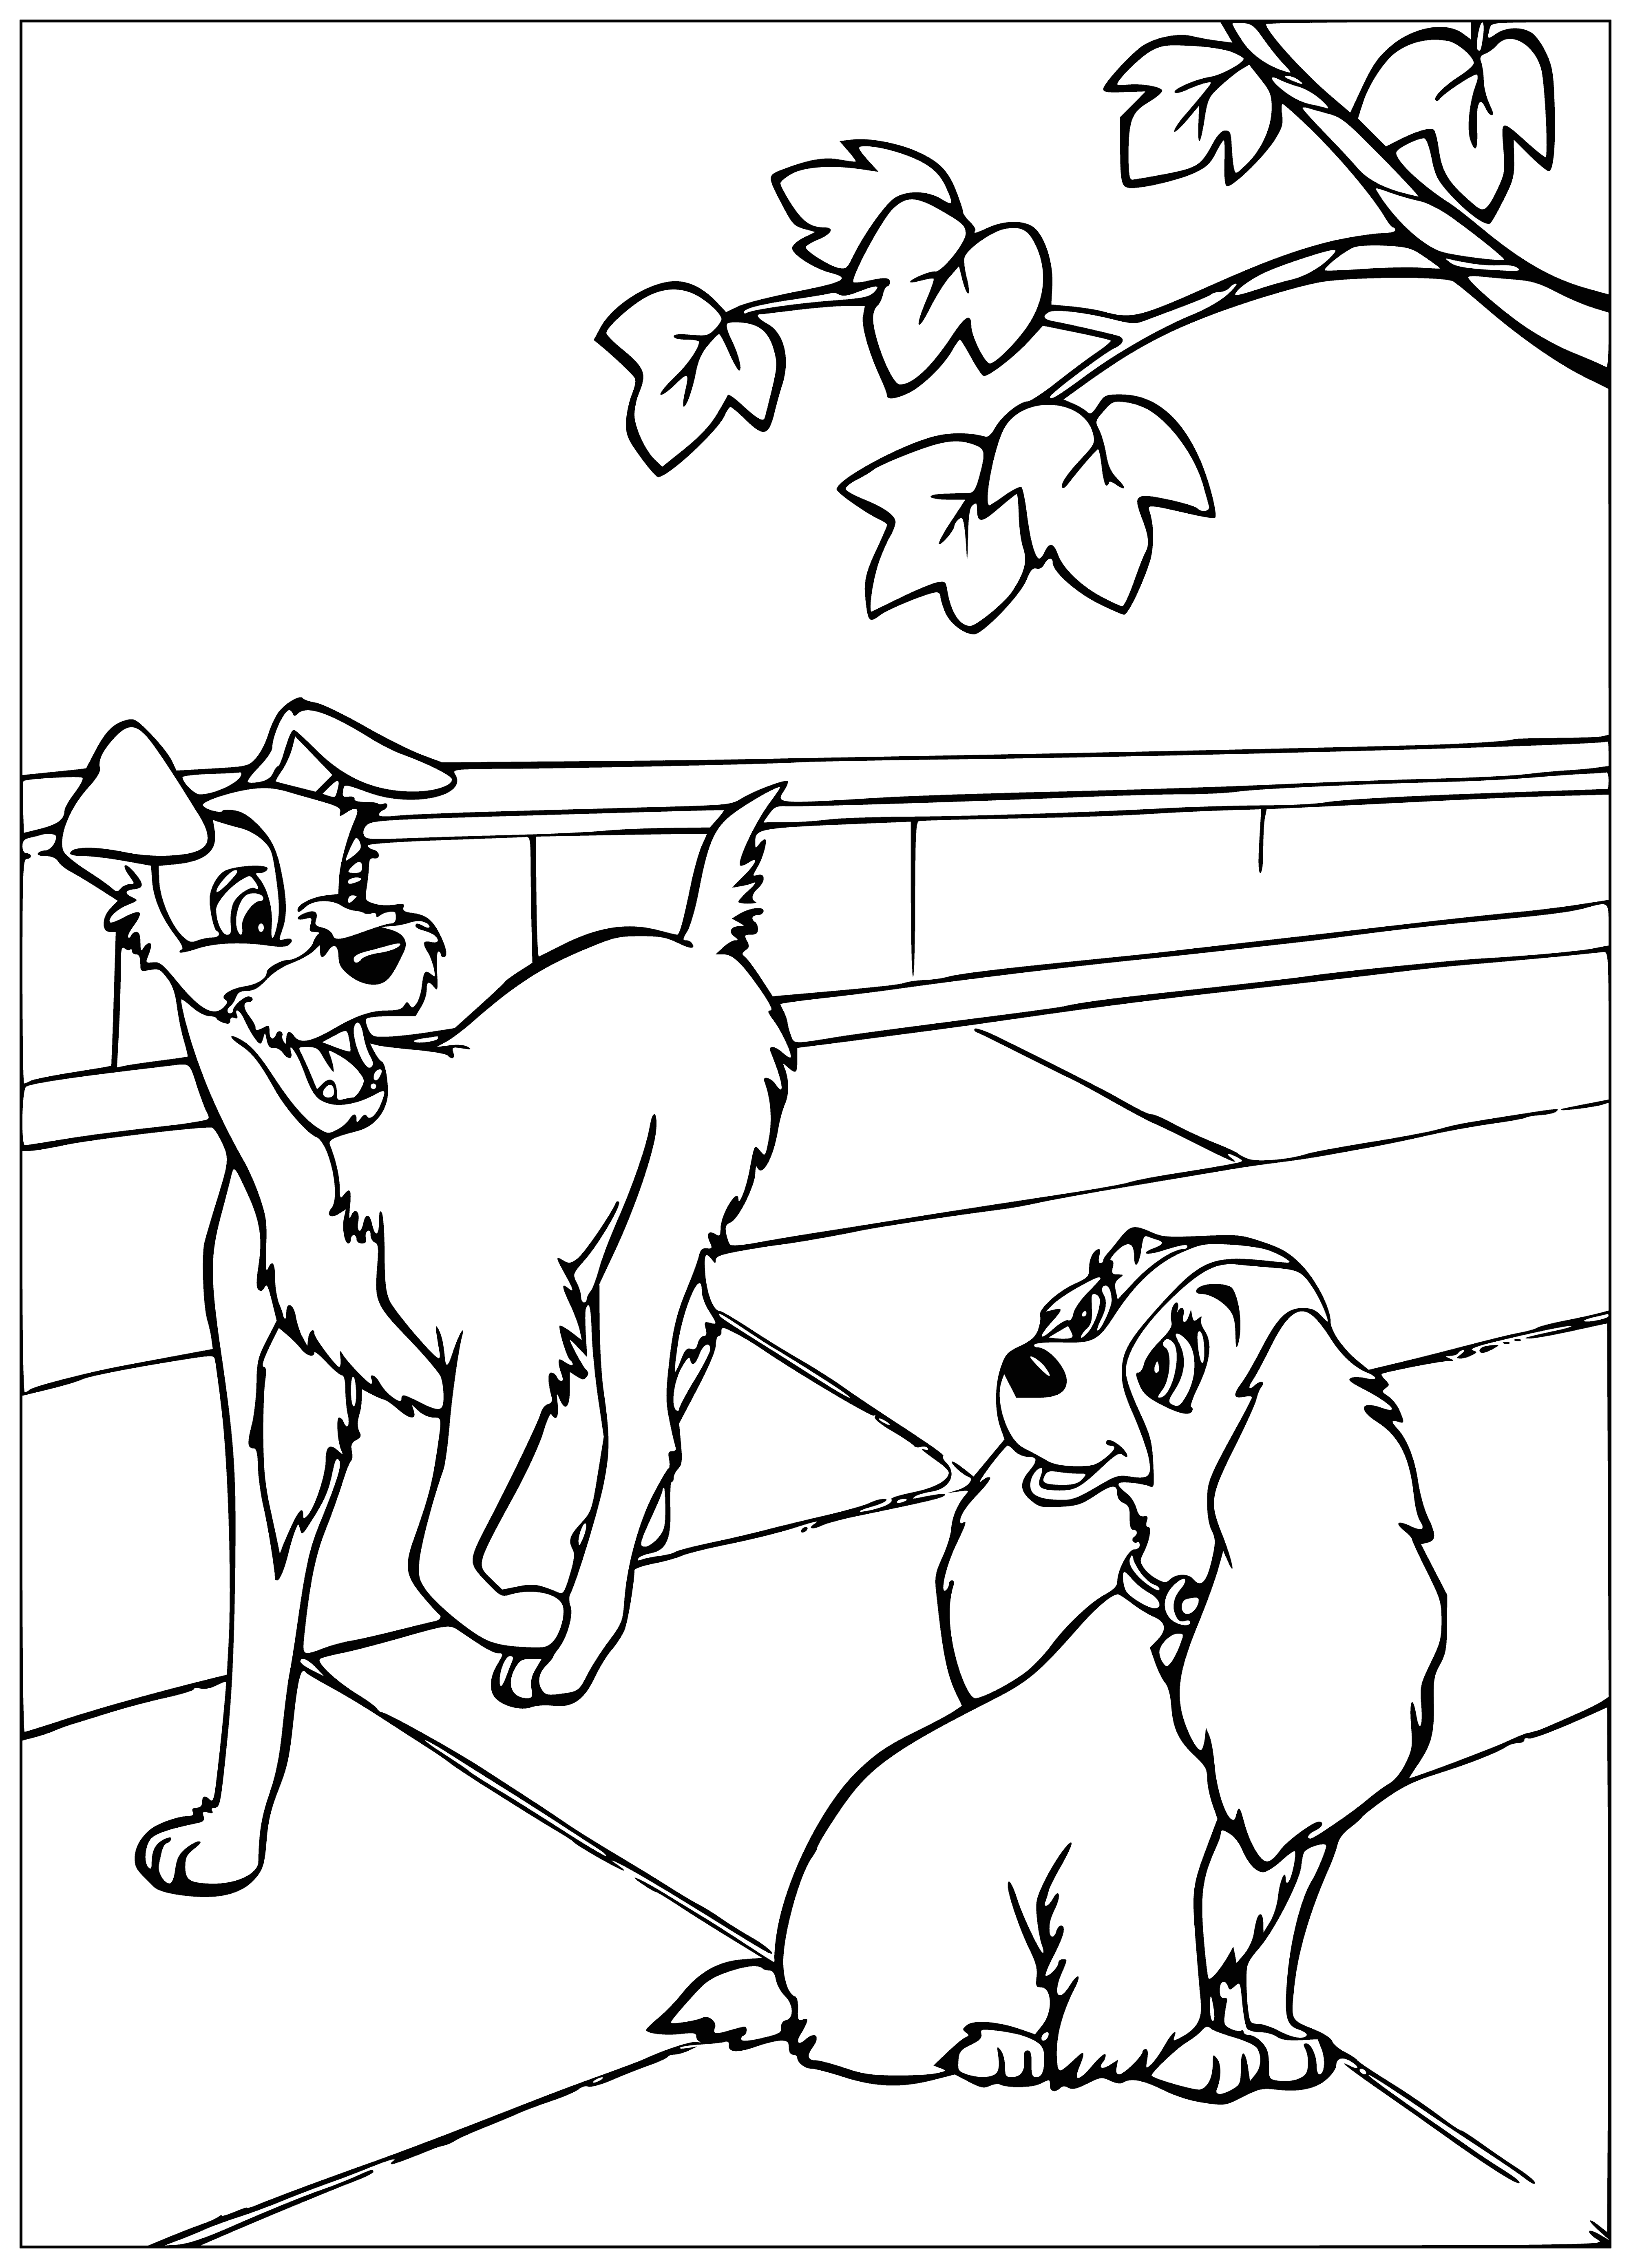 coloring page: --> Lady, a spoiled purebred cocker spaniel, is wary of others until she meets Tramp, a fun-loving mutt living on the street.